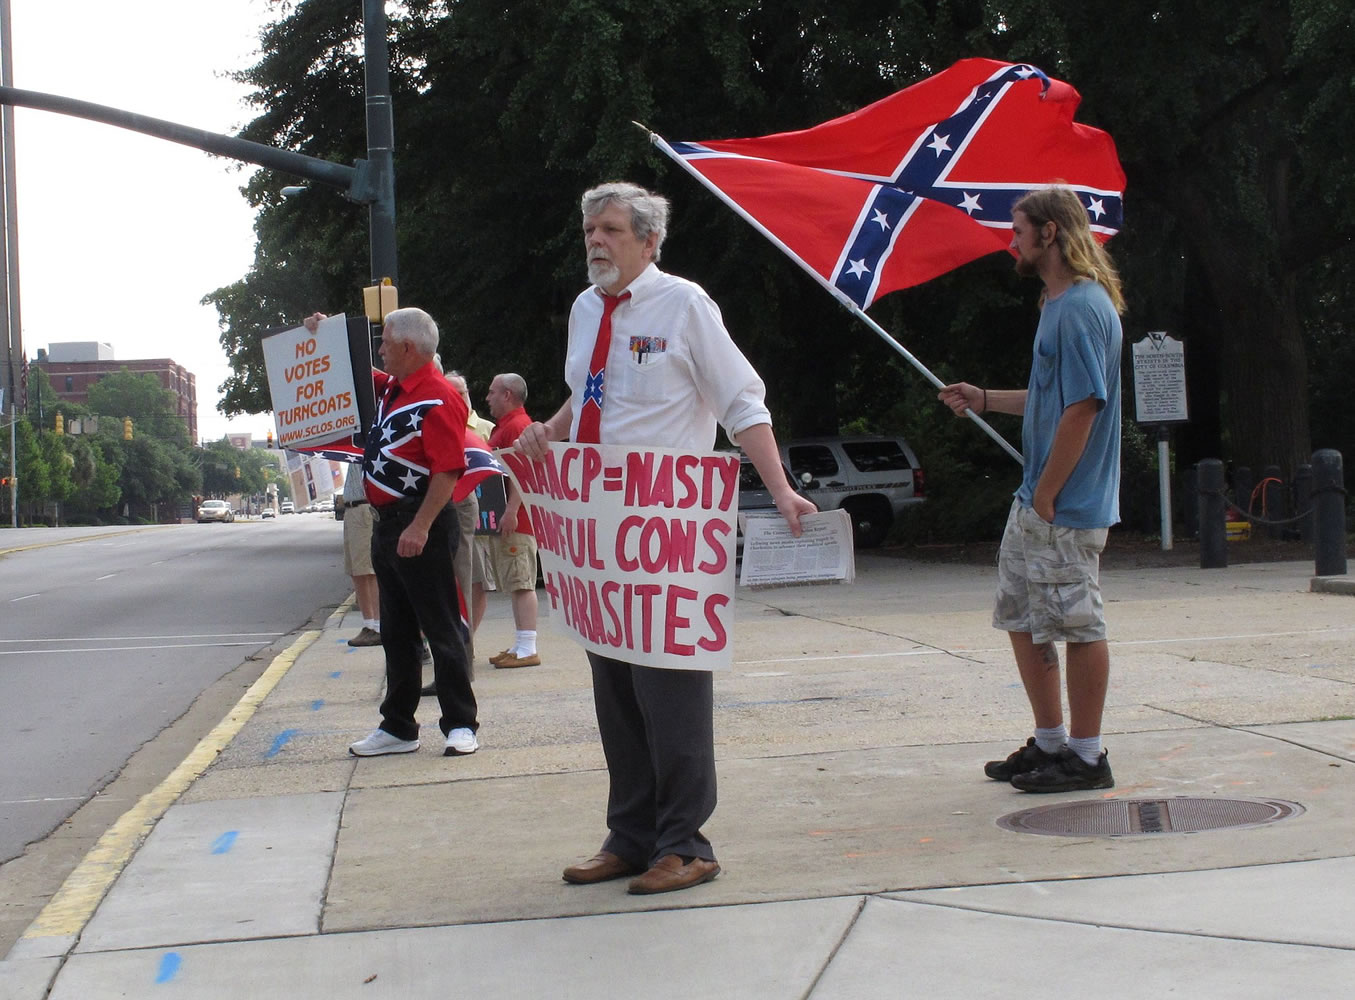 William Cheek, left, Nelson Waller, center, and Jim Collins protest proposals to remove the Confederate flag from the grounds of the South Carolina Statehouse on Monday in Columbia, S.C. The General Assembly returns Monday to discuss Gov.